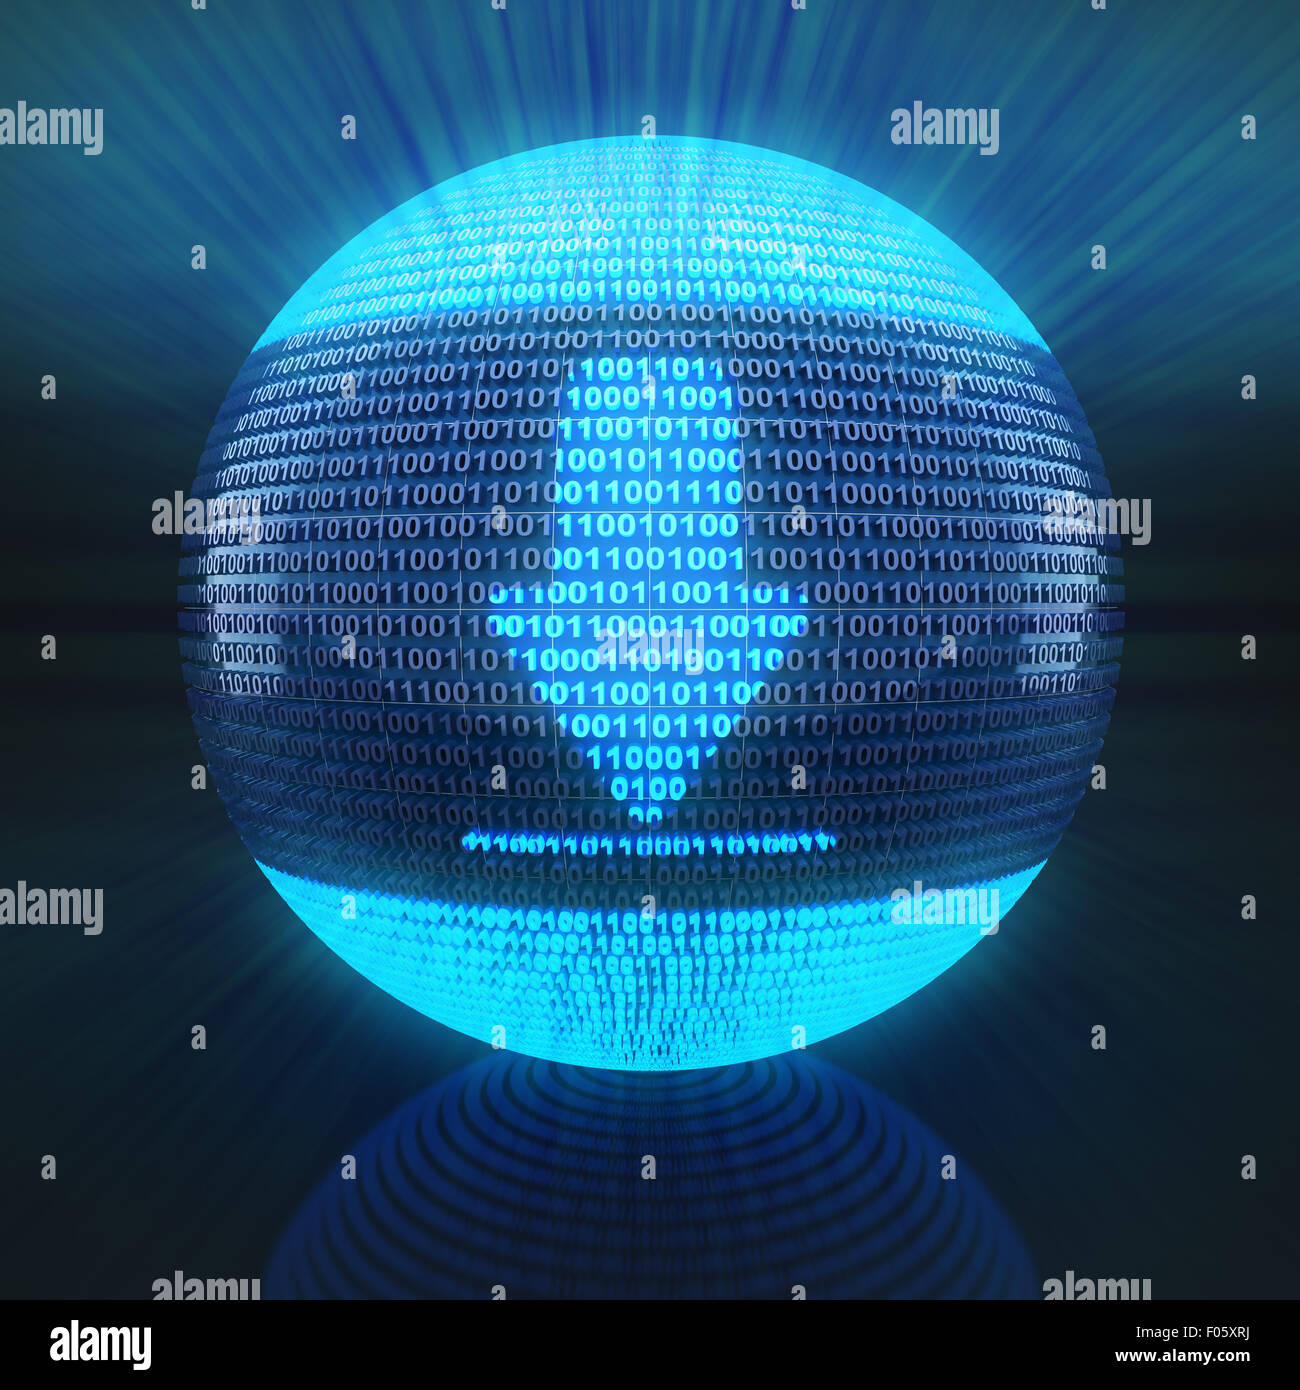 Download icon on globe formed by binary code Stock Photo